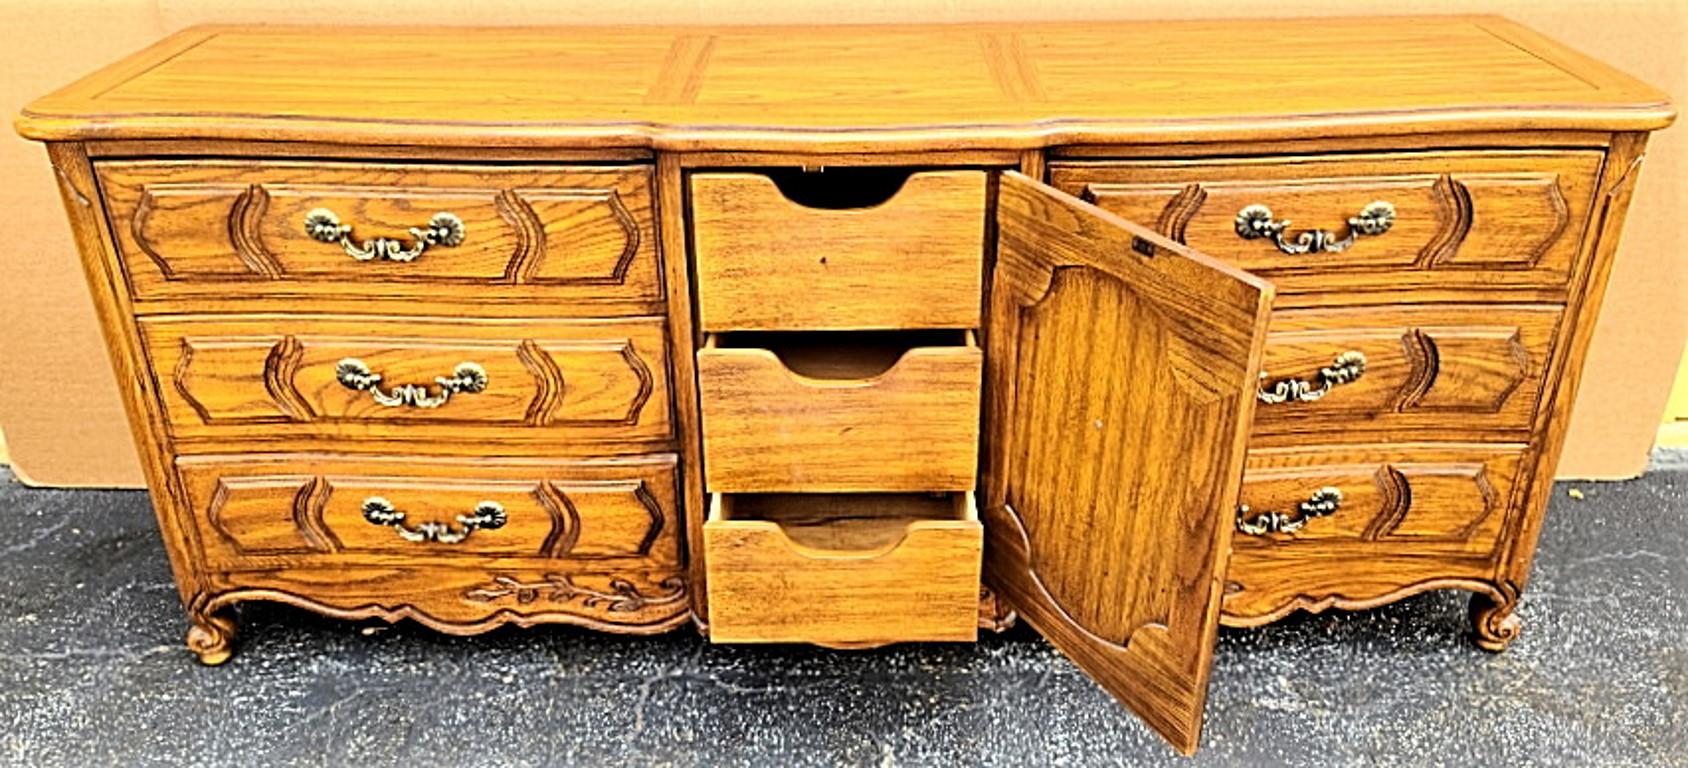 Offering one of our recent palm beach estate fine furniture acquisitions of a 
Vintage Thomasville French Provincial dresser 
Made of solid wood with 9 drawers. 

Approximate measurements in inches
32.5